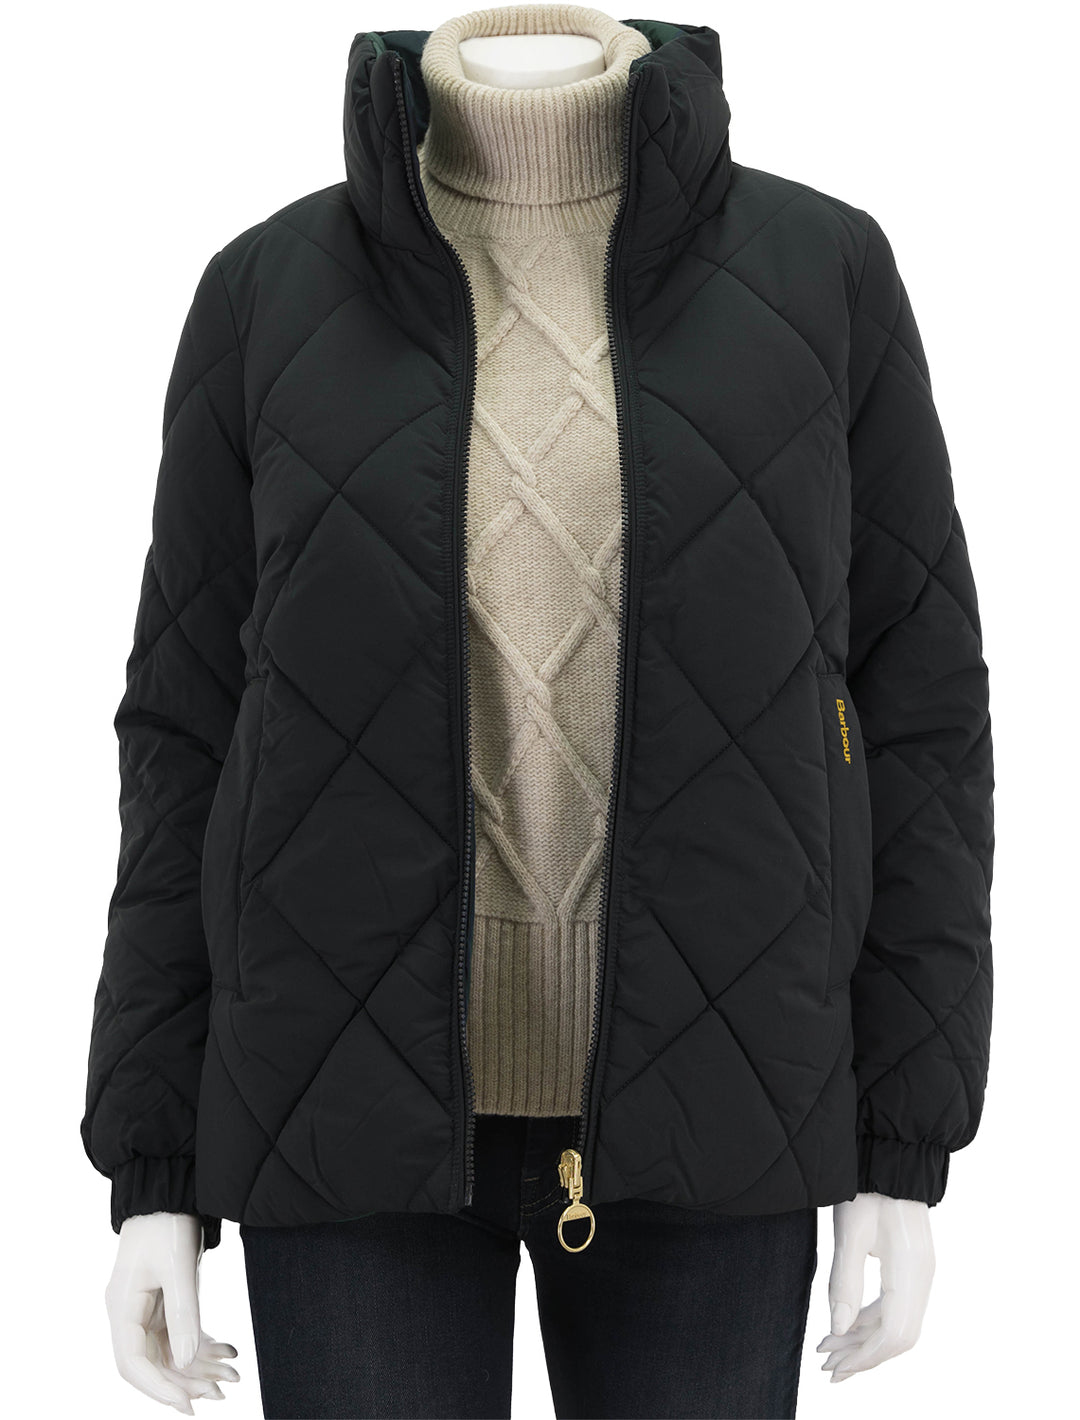 Front view of Barbour's reversible hudswell quilt jacket in black.